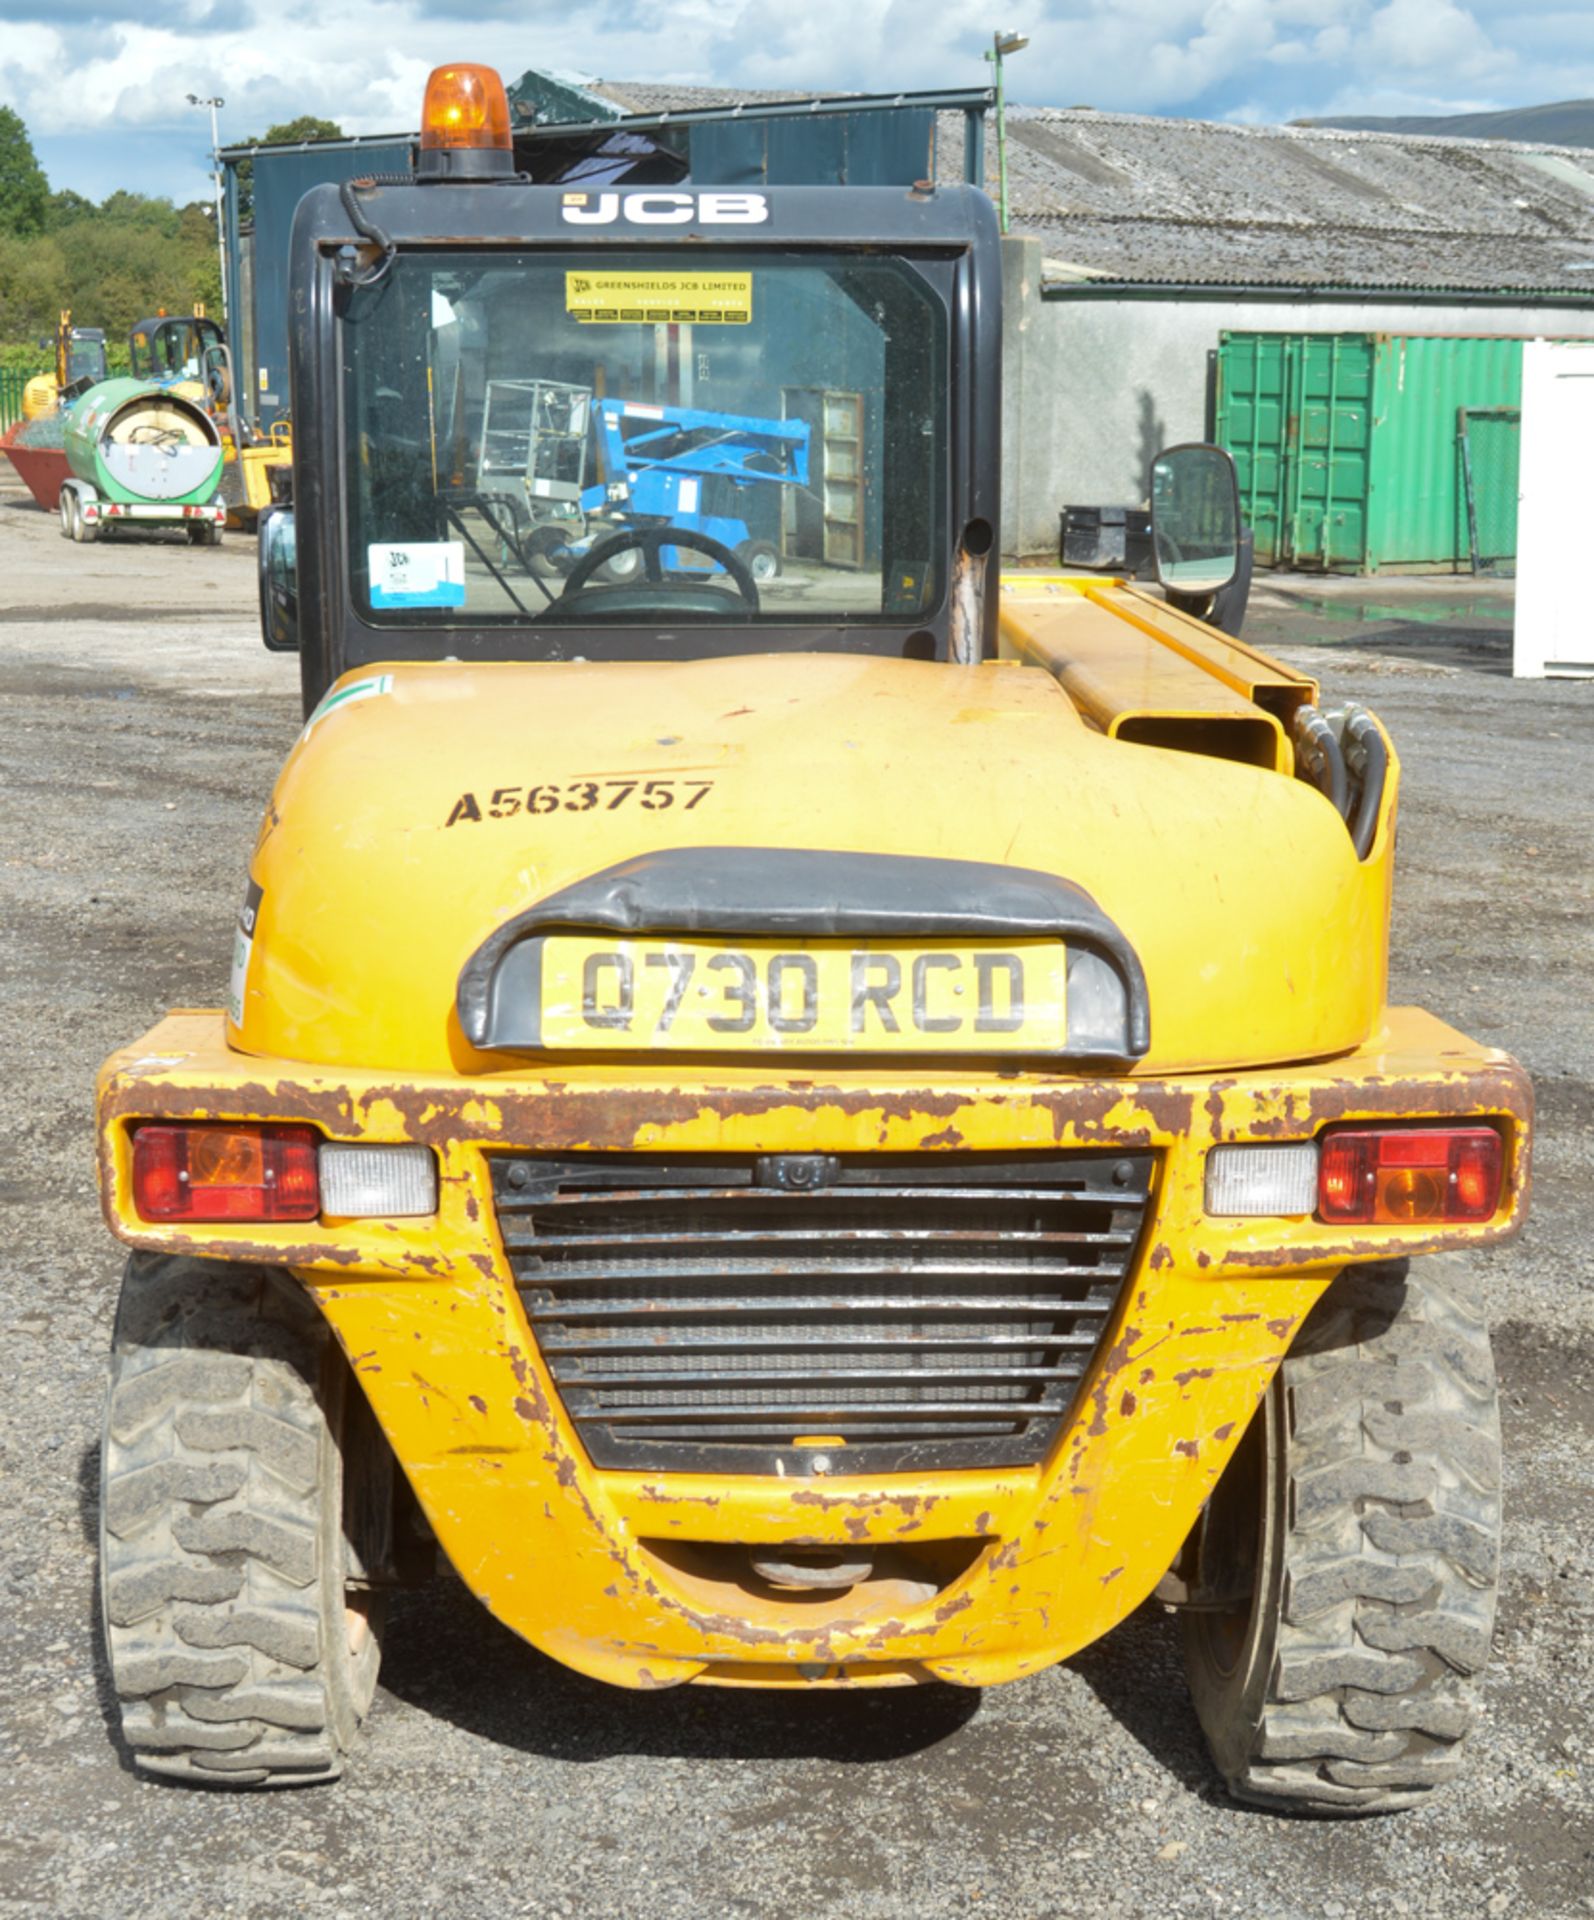 JCB 520-40 4 metre telescopic handler  Year: 2011 S/N: 01781361 Recorded hours: 1847 A563757 - Image 6 of 13